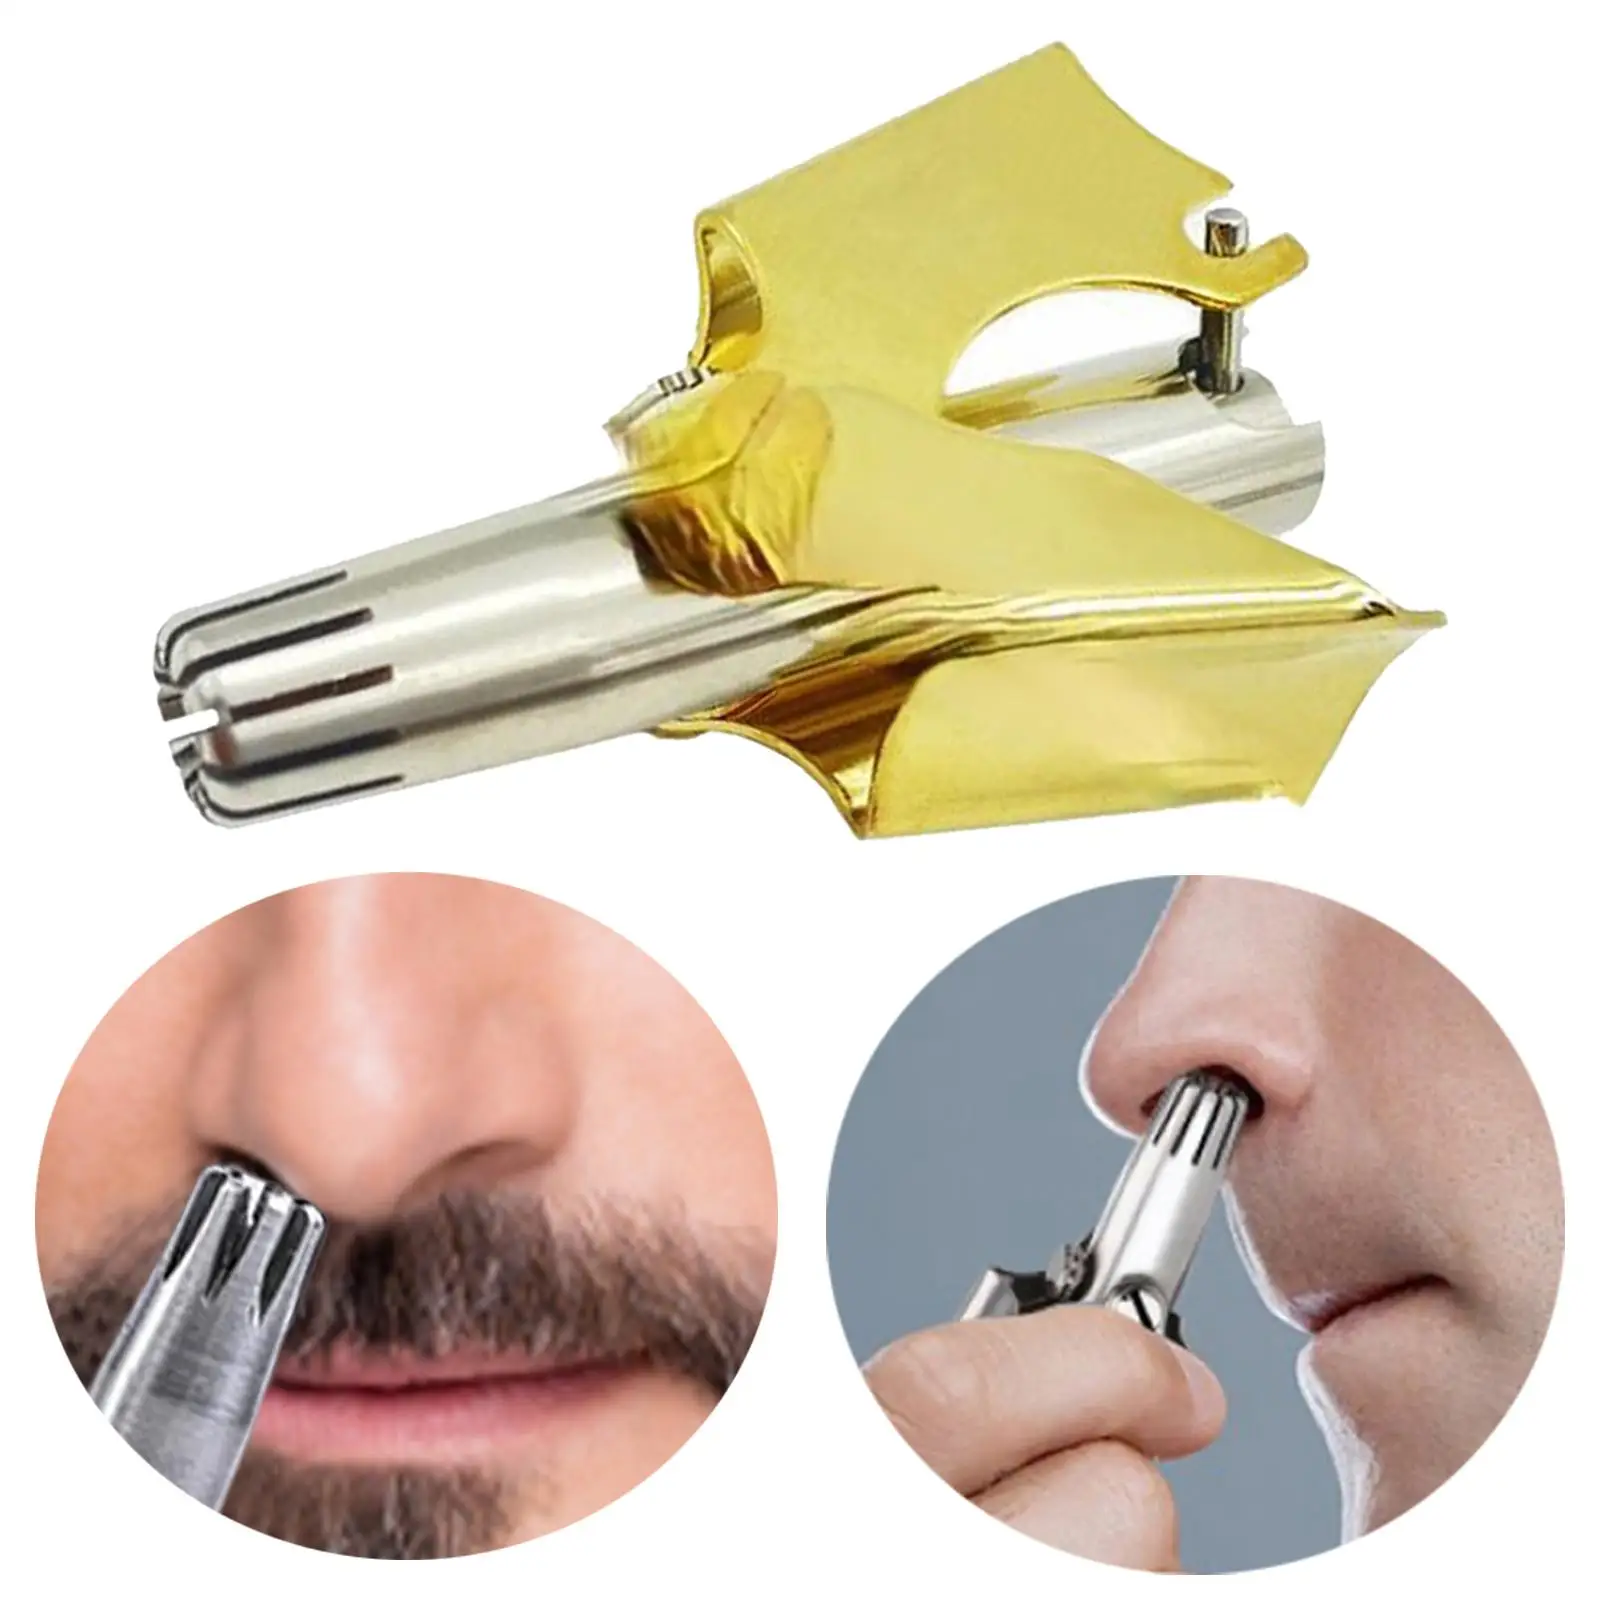 Professional Nose Ear Hair Trimmer Hair Remover Portable Nose Razor Shaver No Batteries Required for Men Women Low Noise Gifts